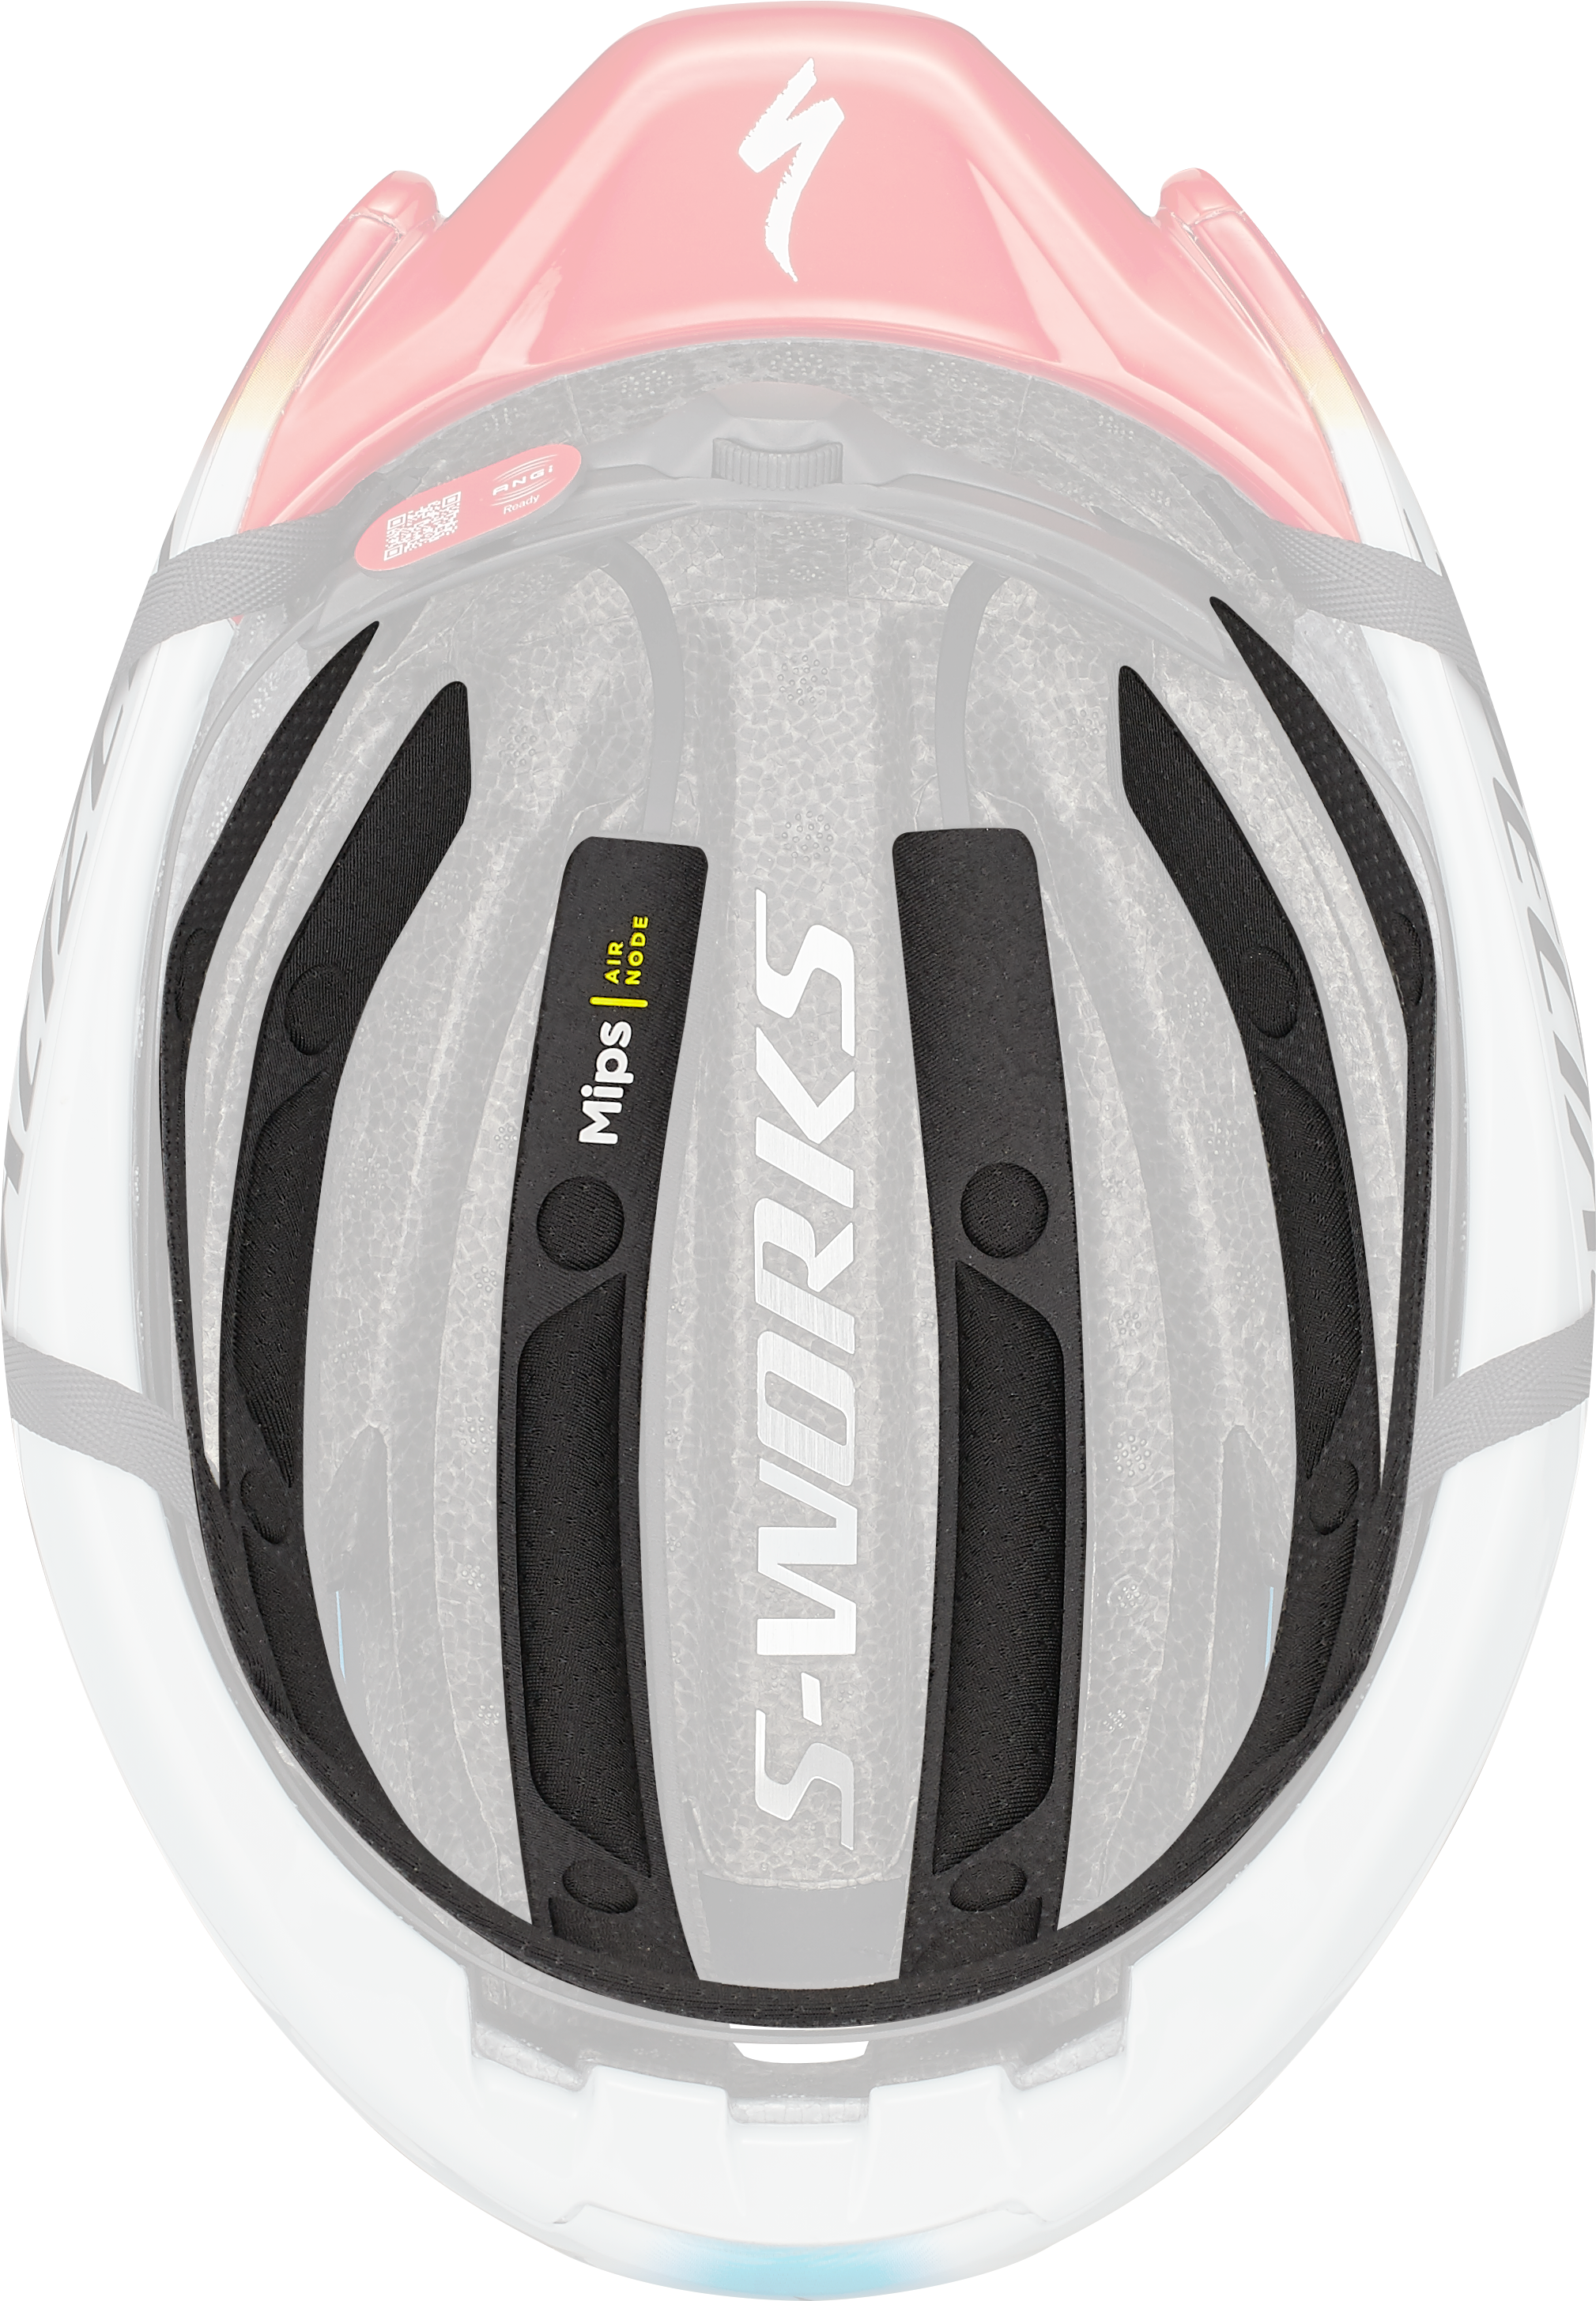 S-WORKS EVADE 3 TEAM REPLICA HLMT CE TOTAL ENERGIES ROUND L(Round 